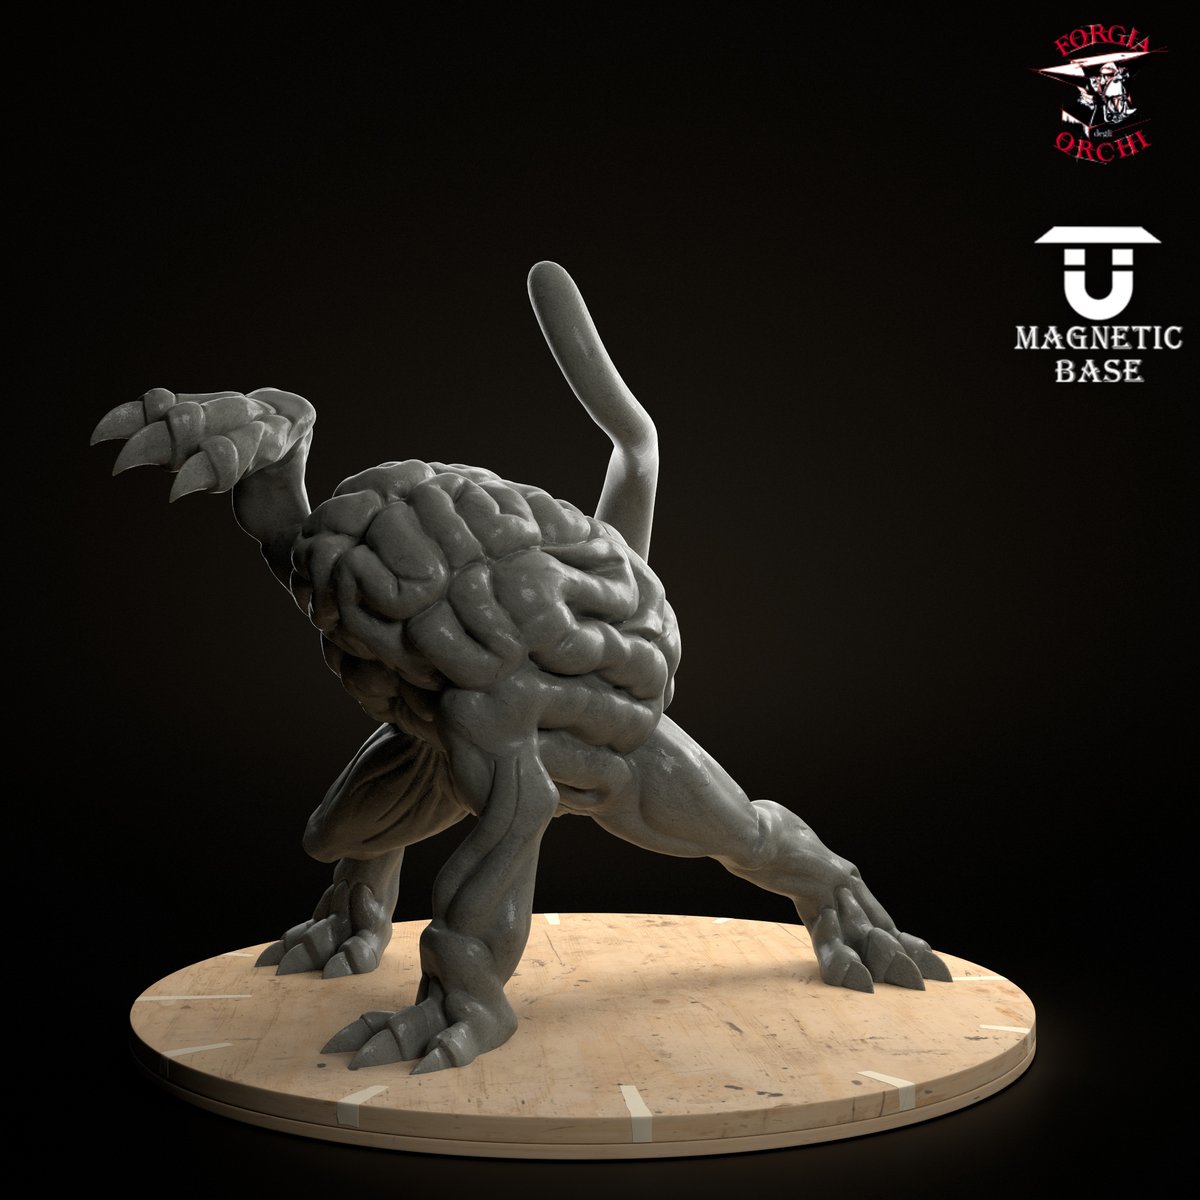 Intellect Devourer
3D model by Bryan Nafarrate (gumroad.com/nafarrate)
Buy it on our site forgiadegliorchi.it #3dPrinting #3dModeling #miniature #rpg #tabletopminiatures #tabletopgames #roleplayinggame #roleplaygame #dungeonsanddragons #dndminiatures #resinprintint